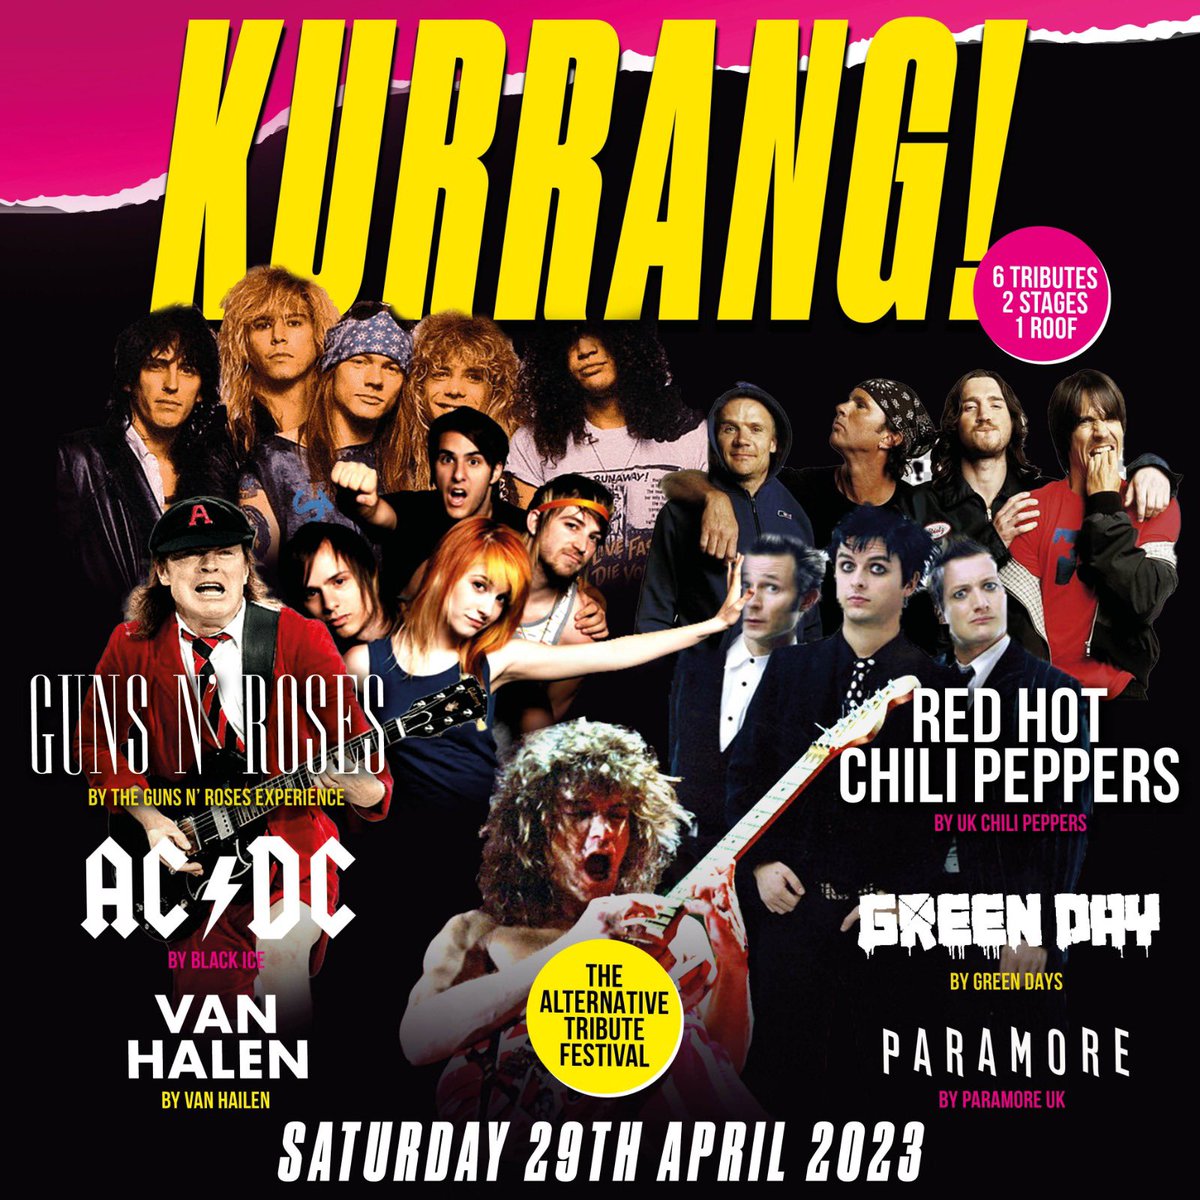 KURRANG! 🎸 6 TRIBUTES - 2 STAGES - 1 ROOF! 🙌 The Guns N' Roses Experience Uk Chili Peppers Black Ice Green Days Van Hailen Paramore UK 🎫 seetickets.com/event/kurrang-…